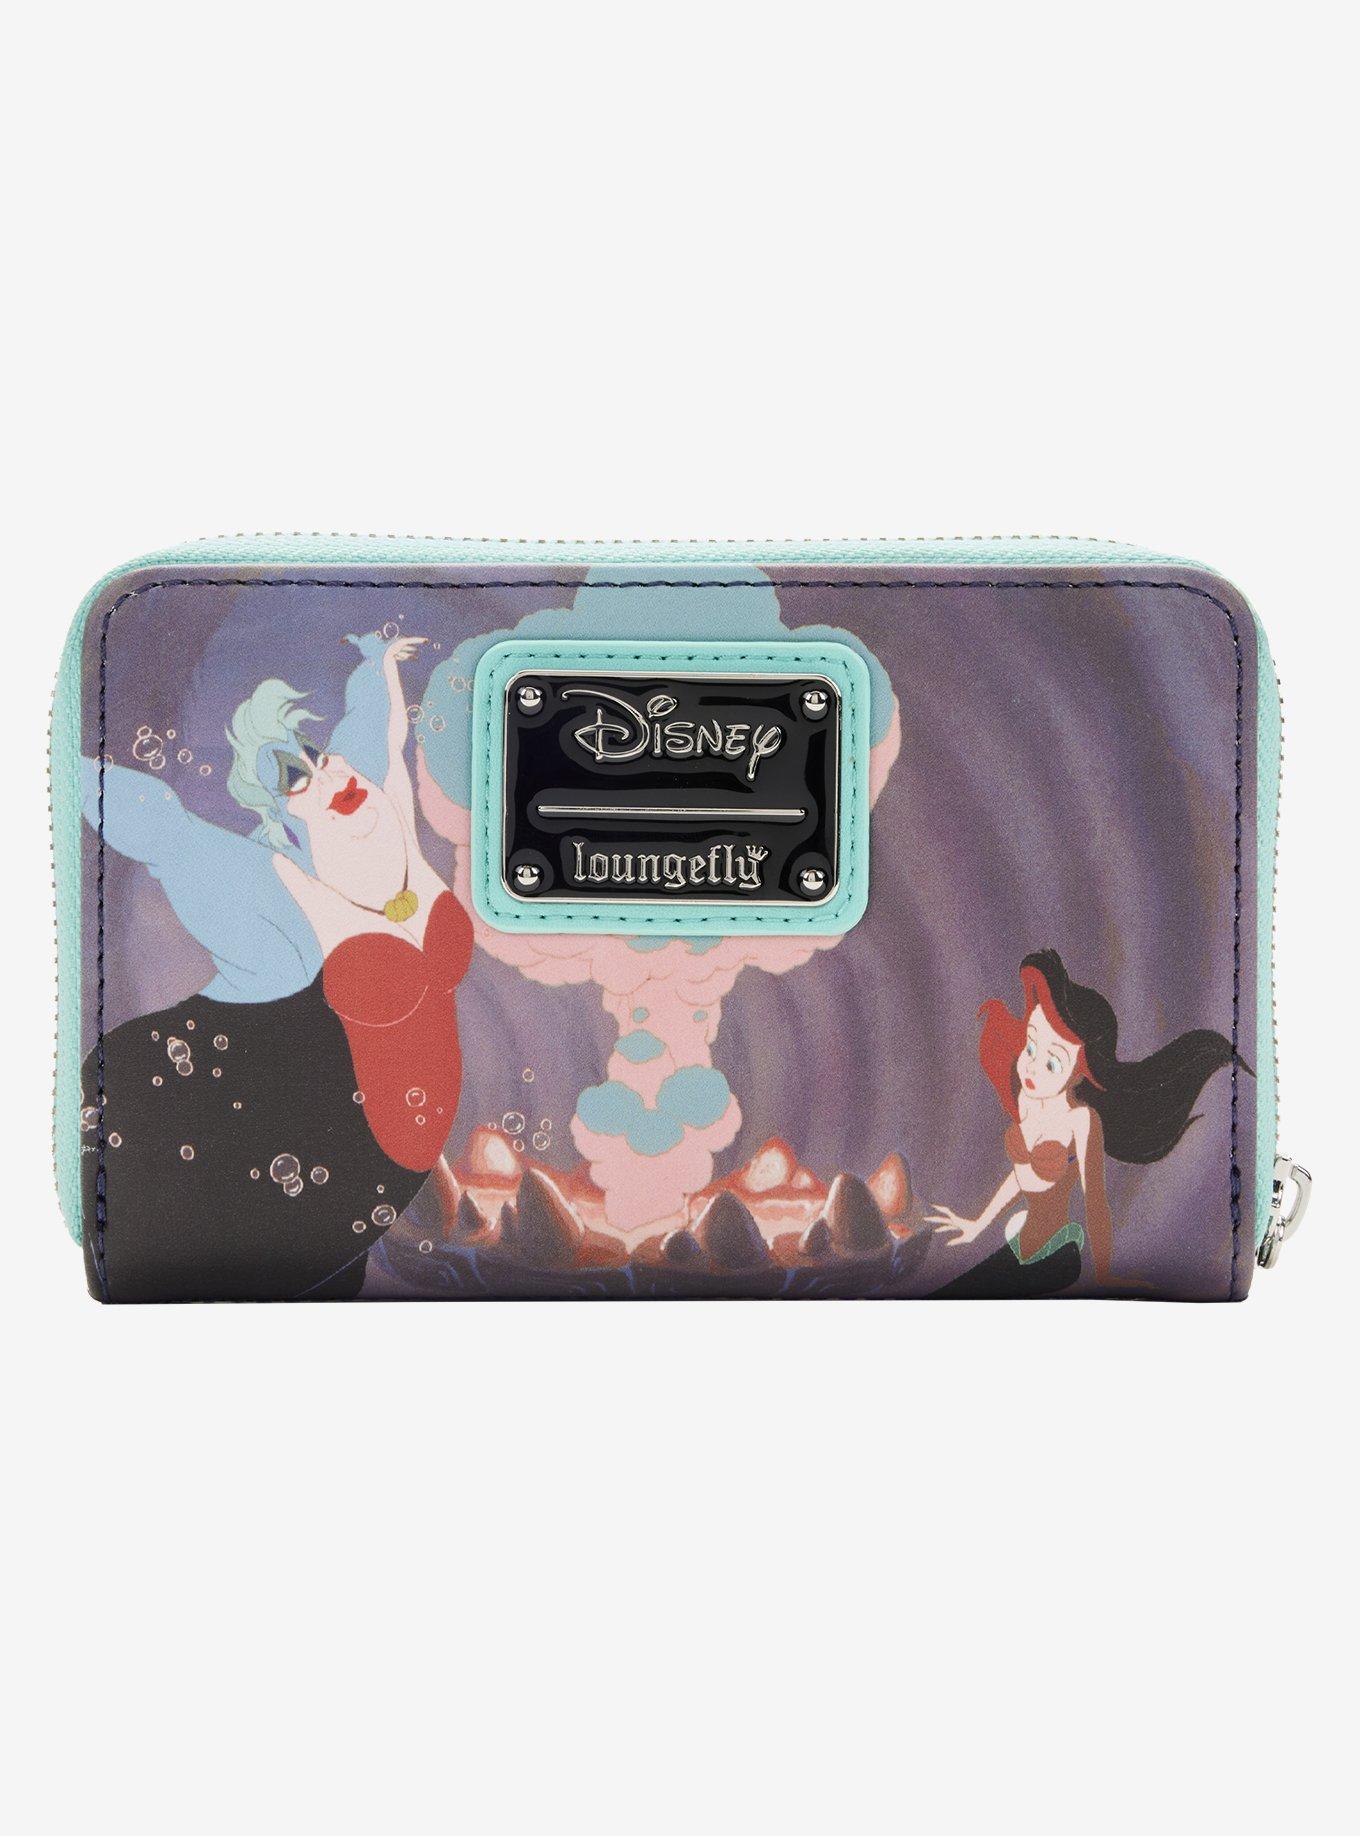 Disney Loungefly Coin/Cosmetic Bag - Mickey Mouse Parts - Coin Bag